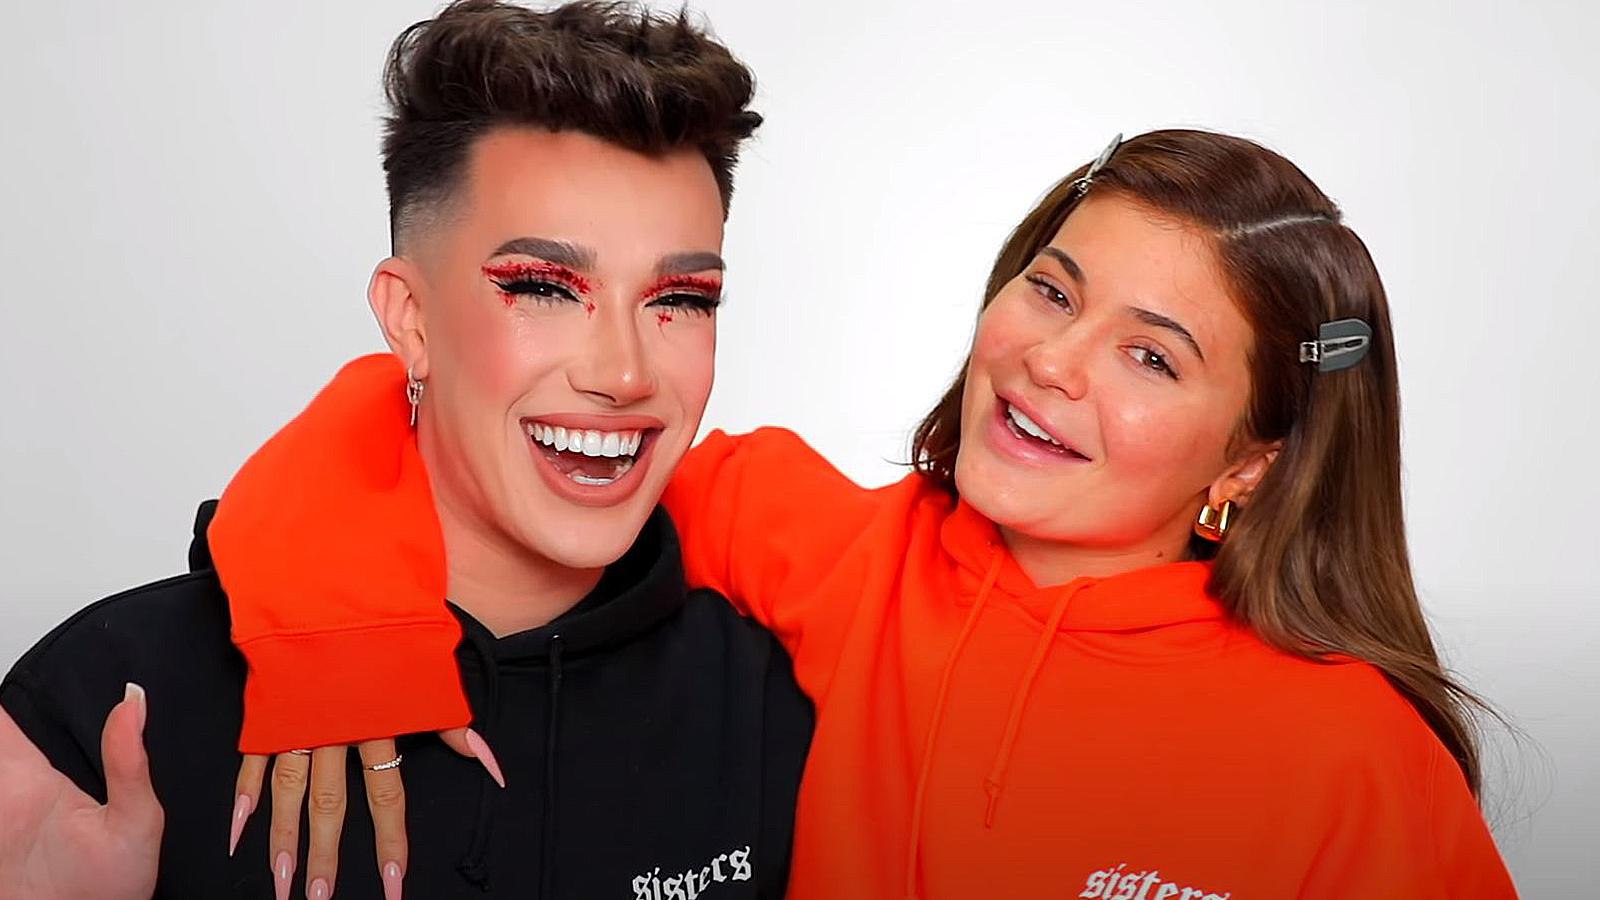 Kylie Jenner and James Charles hug during a YouTube video.